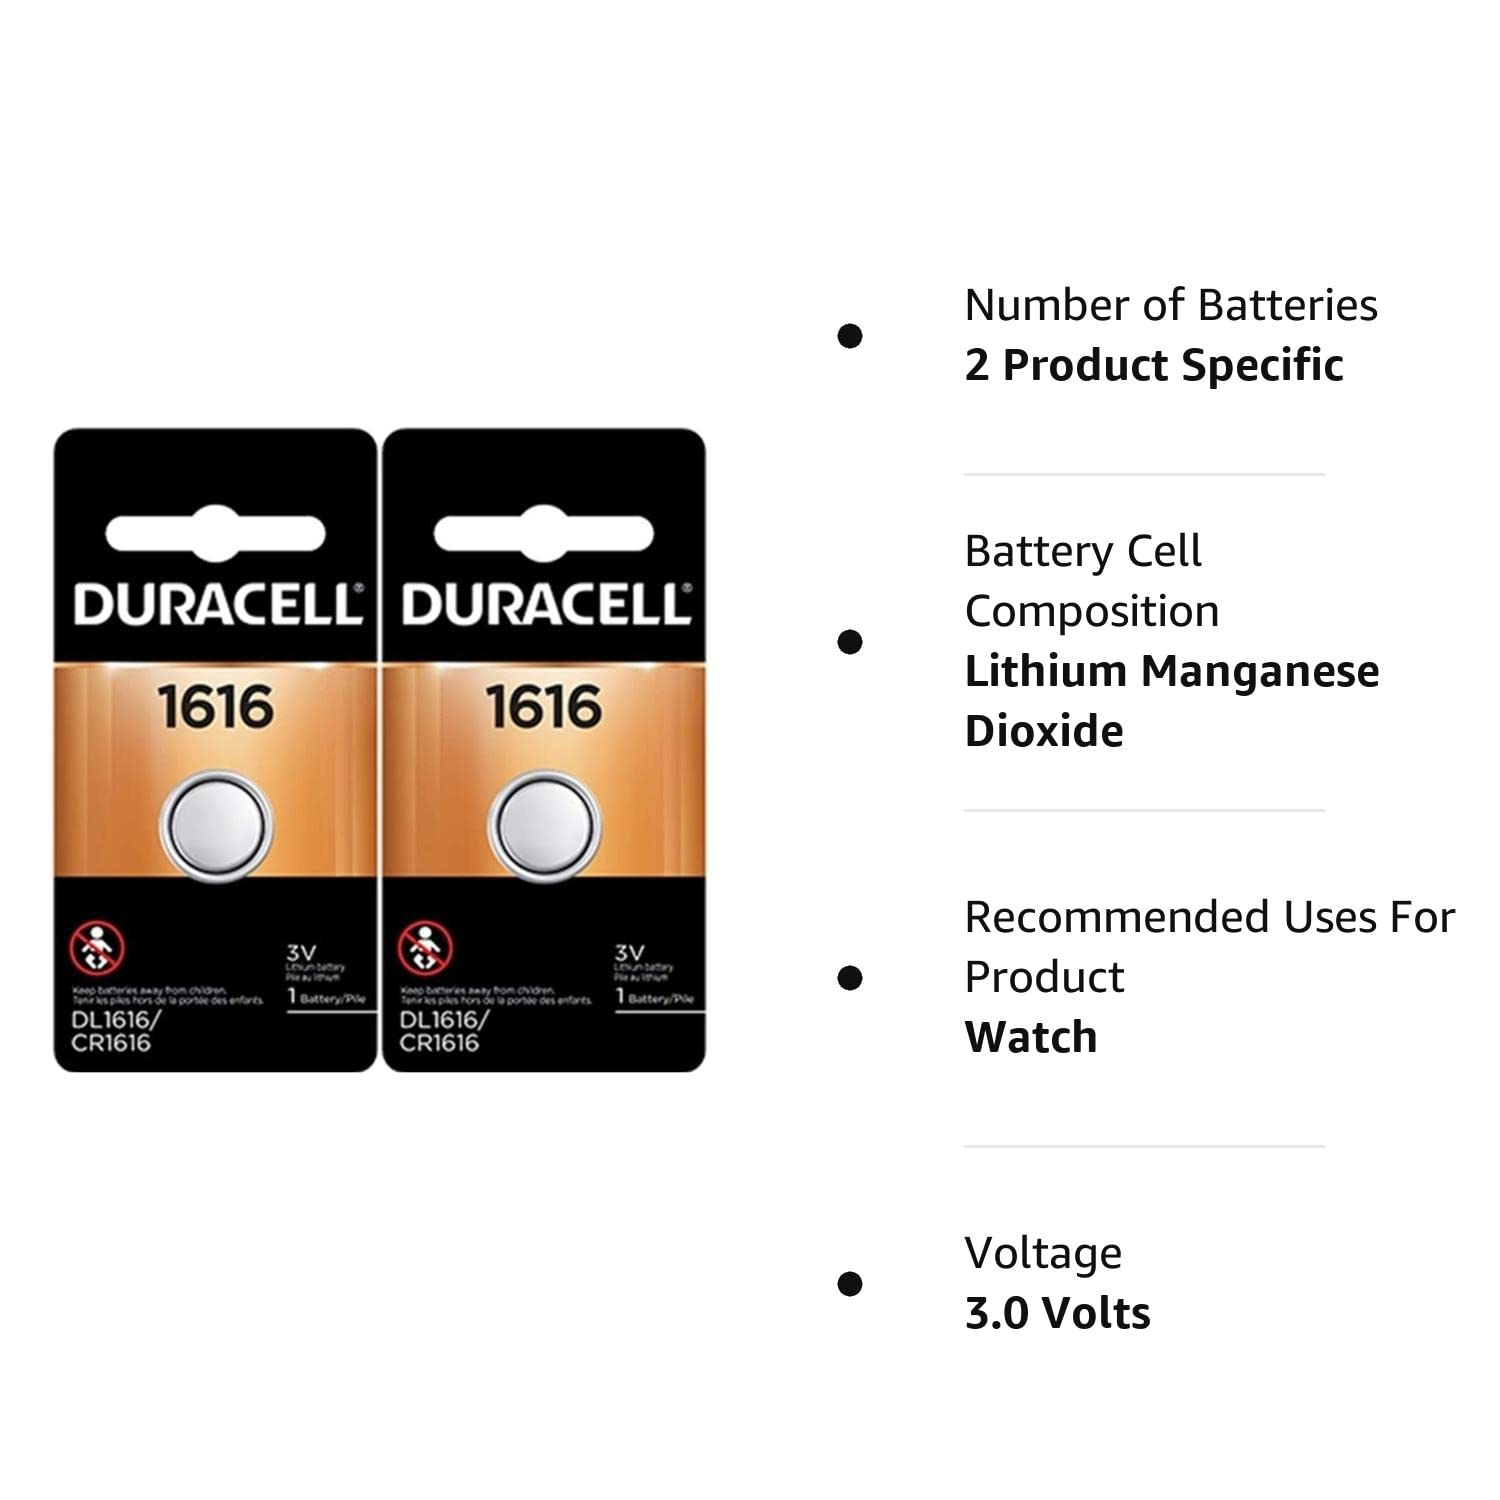 Duracell 1616 DL1616 CR1616 DL1616B2PK Coin Cell Watch Battery 3.0 Volt Lithium, 2 Count (Pack of 1)